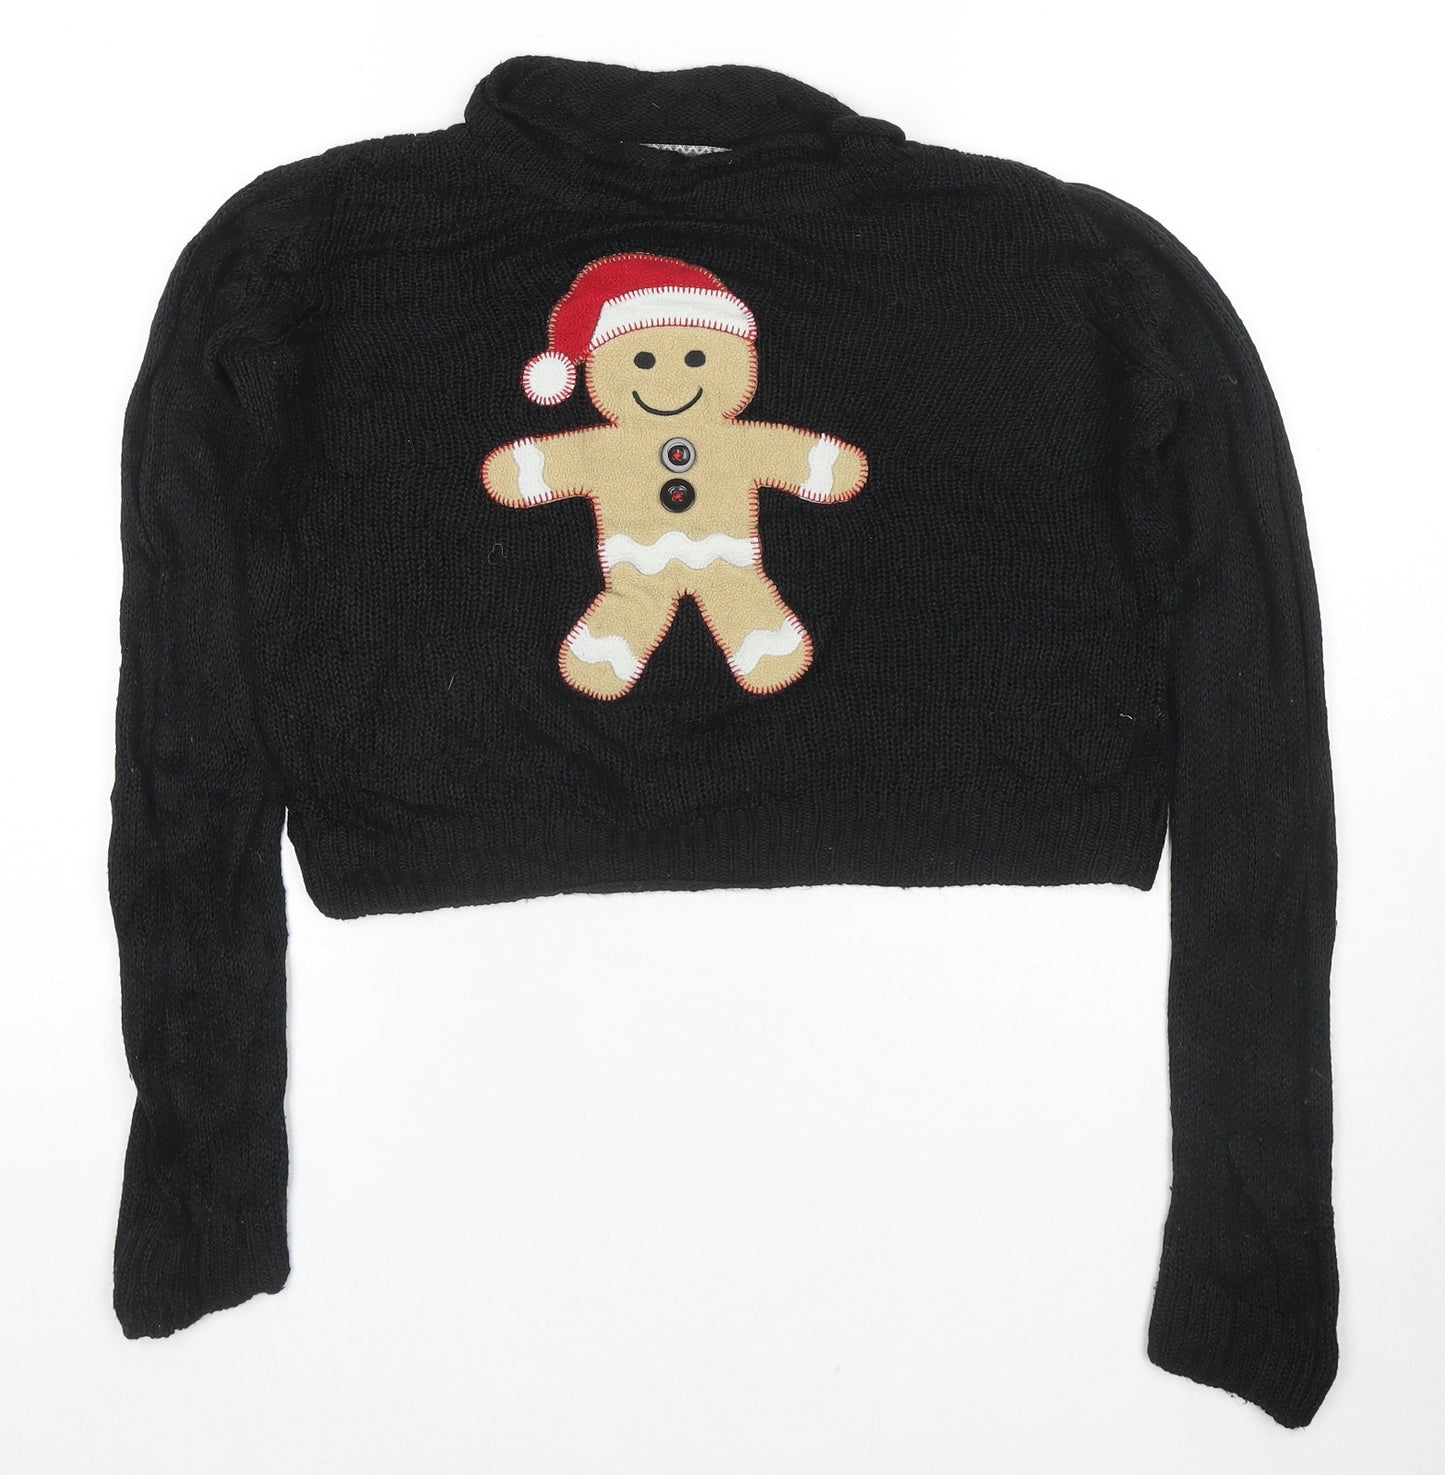 New Look Womens Black Roll Neck Acrylic Pullover Jumper Size 10 - Gingerbread Man Christmas